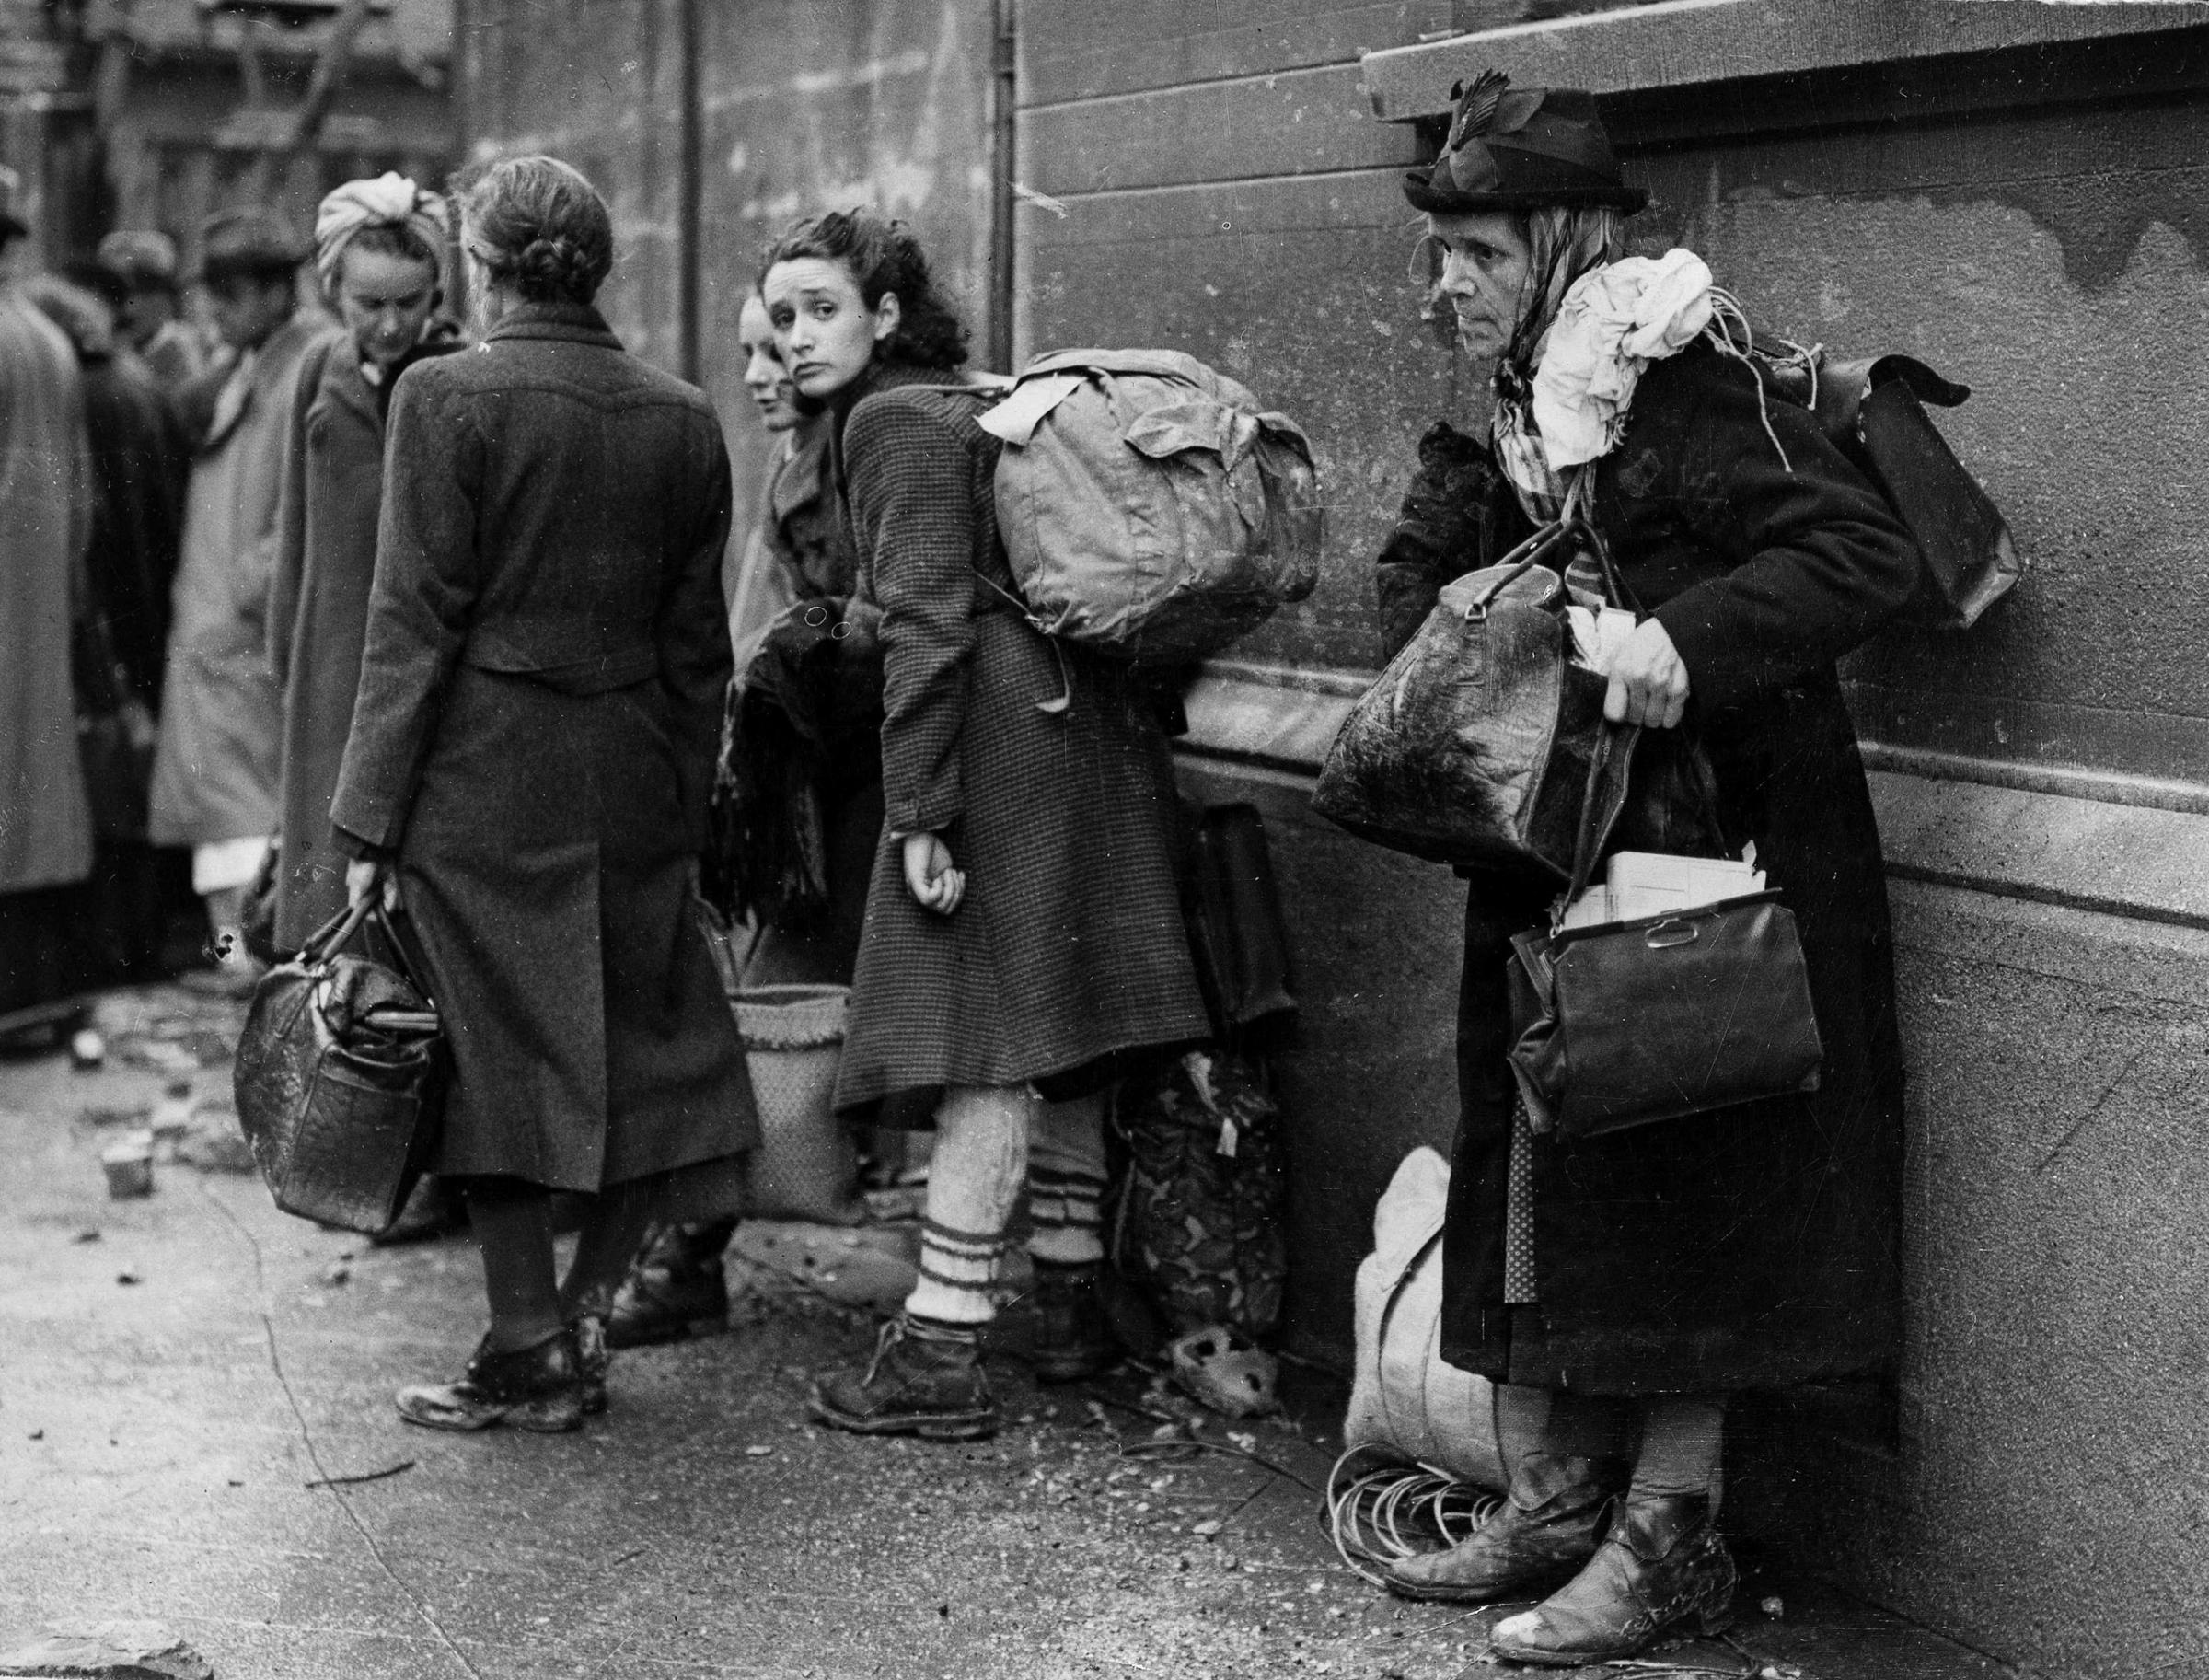 German civilian refugees prepare to flee war-torn Aachen, Germany as the battle for the doomed city draws to a close, Oct. 24, 1944. The refugees have been living in air-raid shelters as the battle for the city rages on. The Americans have about 4,000 of these refugees on their hands, who are being taken to a camp in Belgium and temporarily housed in a large school.